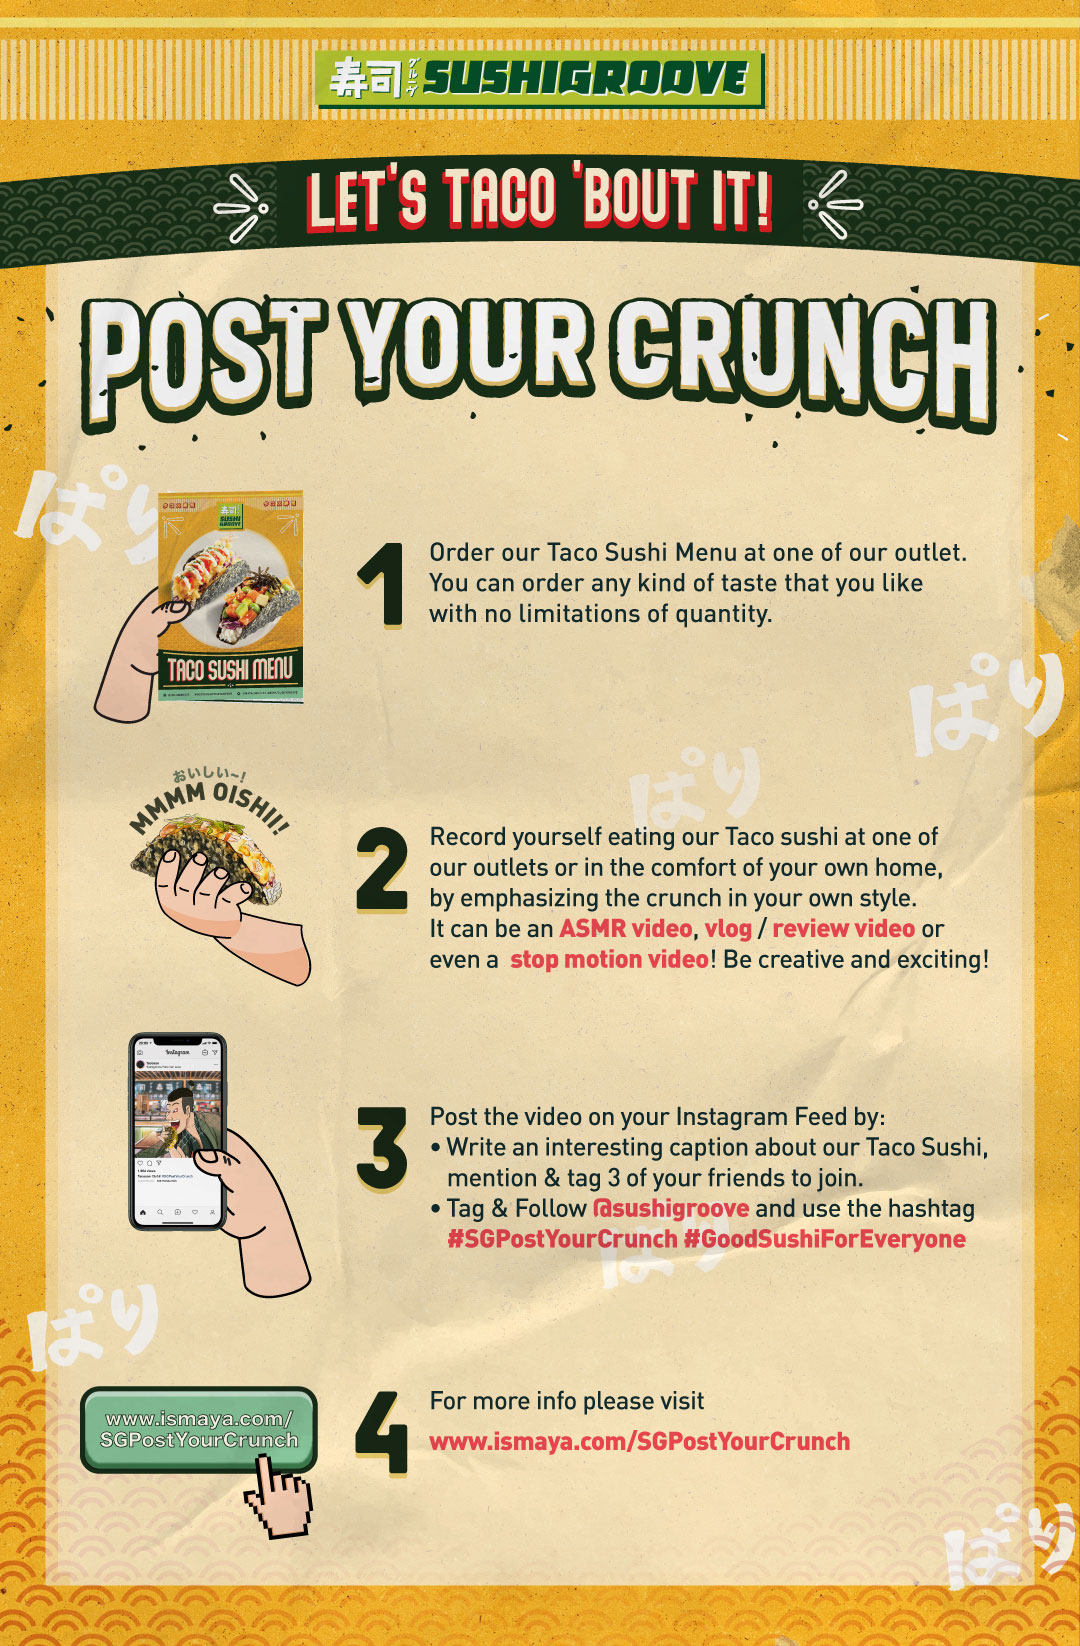 Sushigroove Special Promo Post Your Crunch - Ismaya